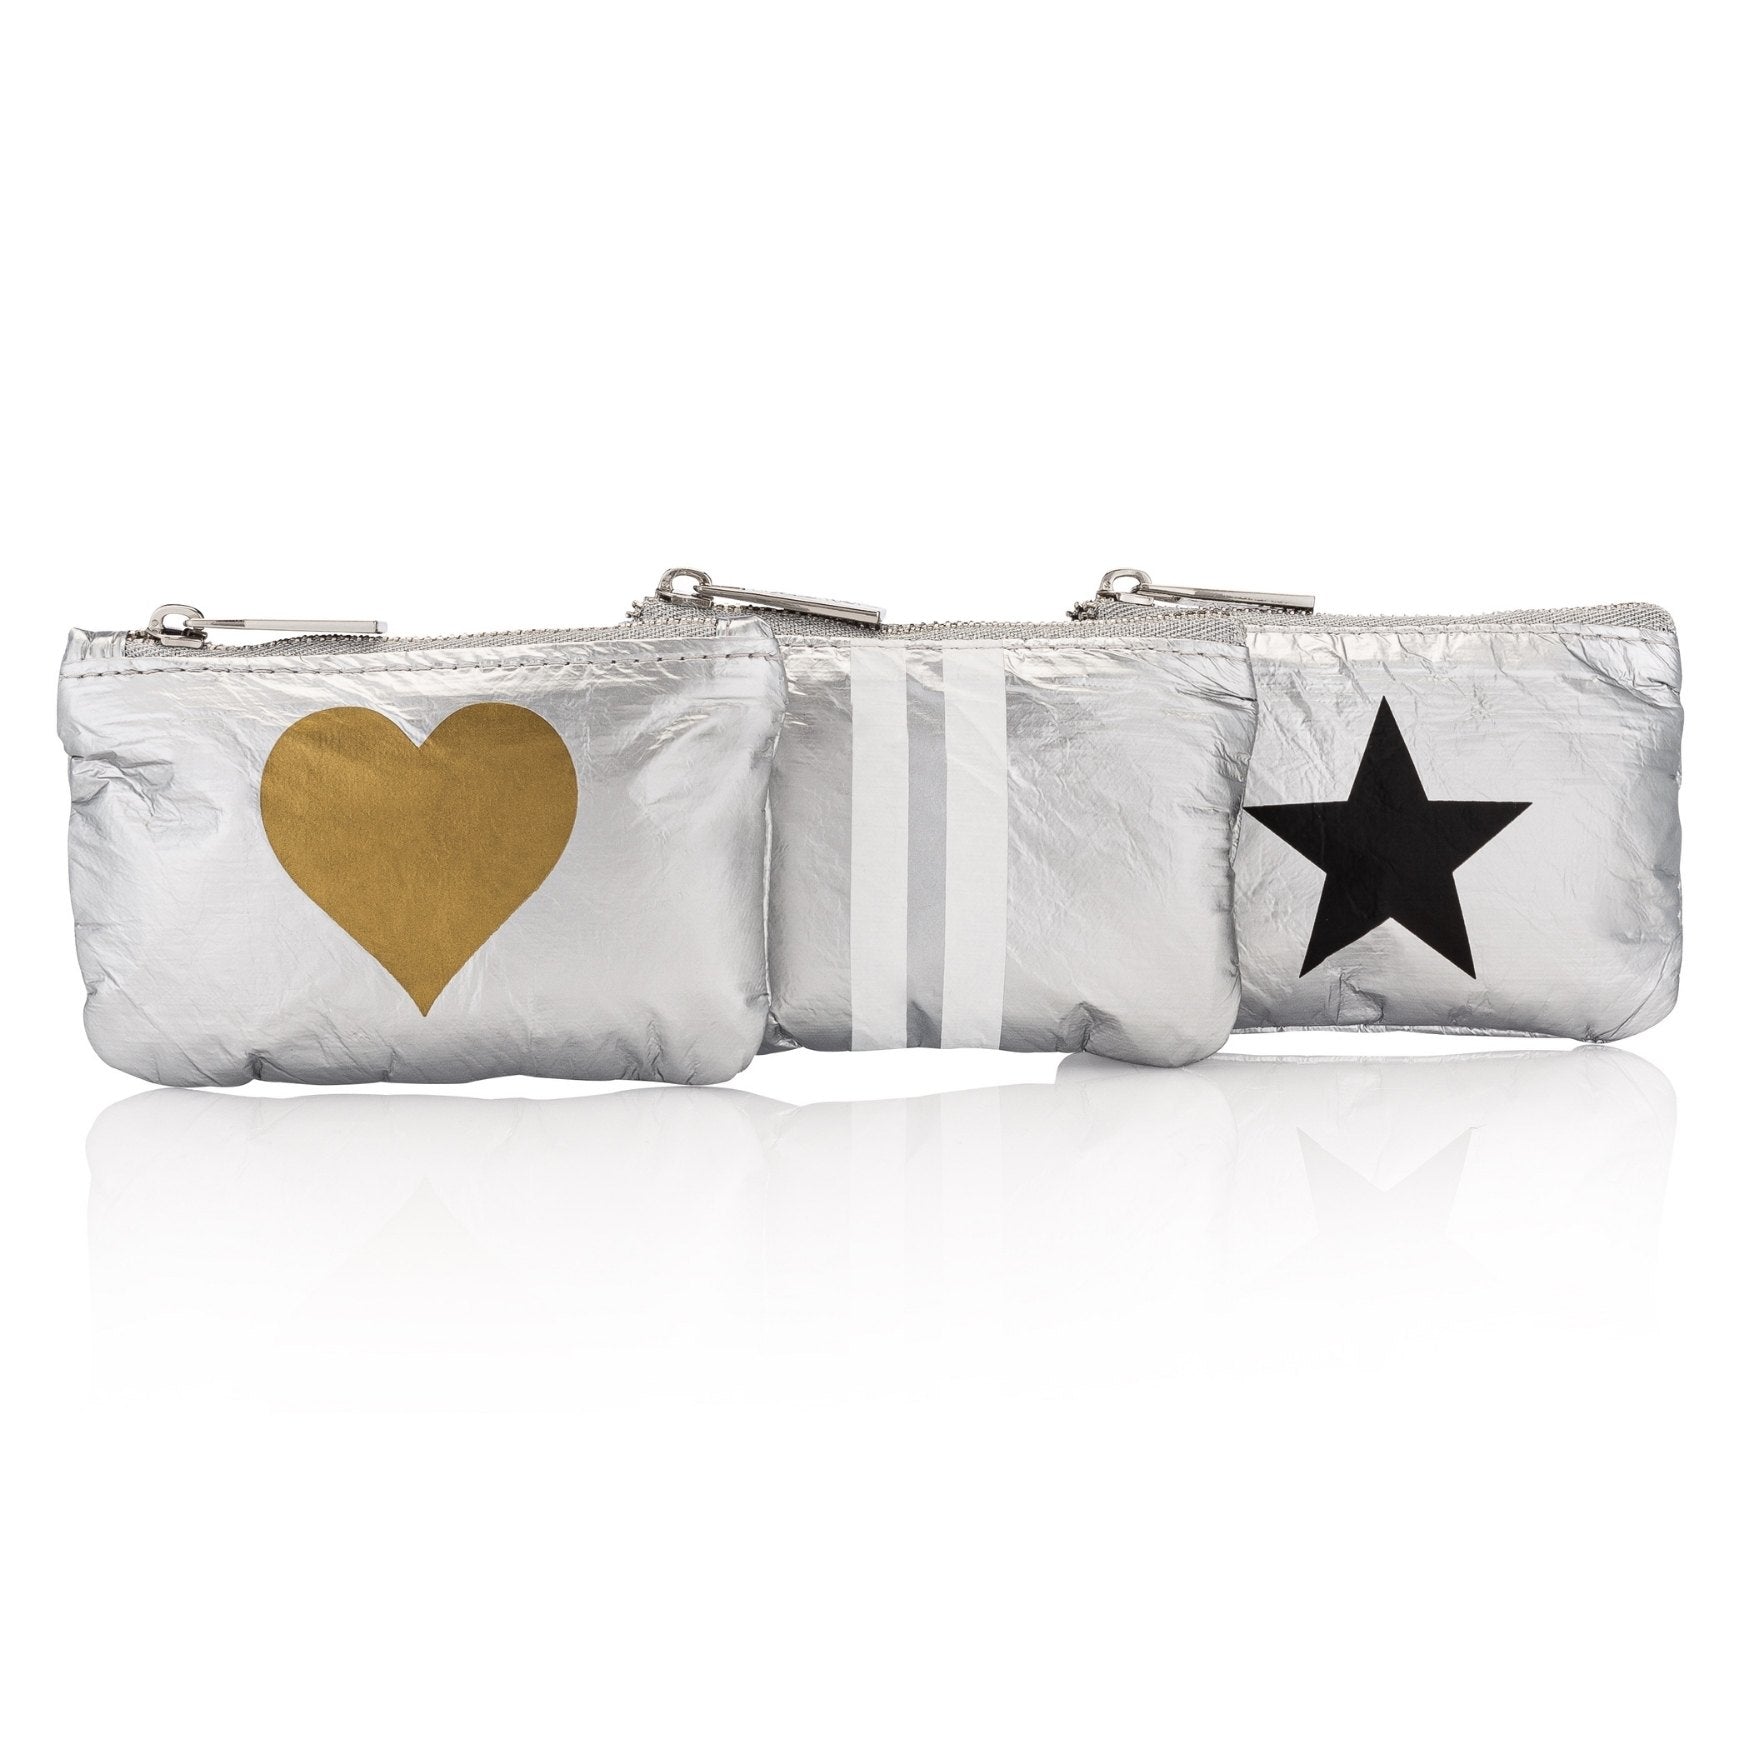 Set of Three Gift Card Holder Packs - Silver with Heart, White Stripes and Star